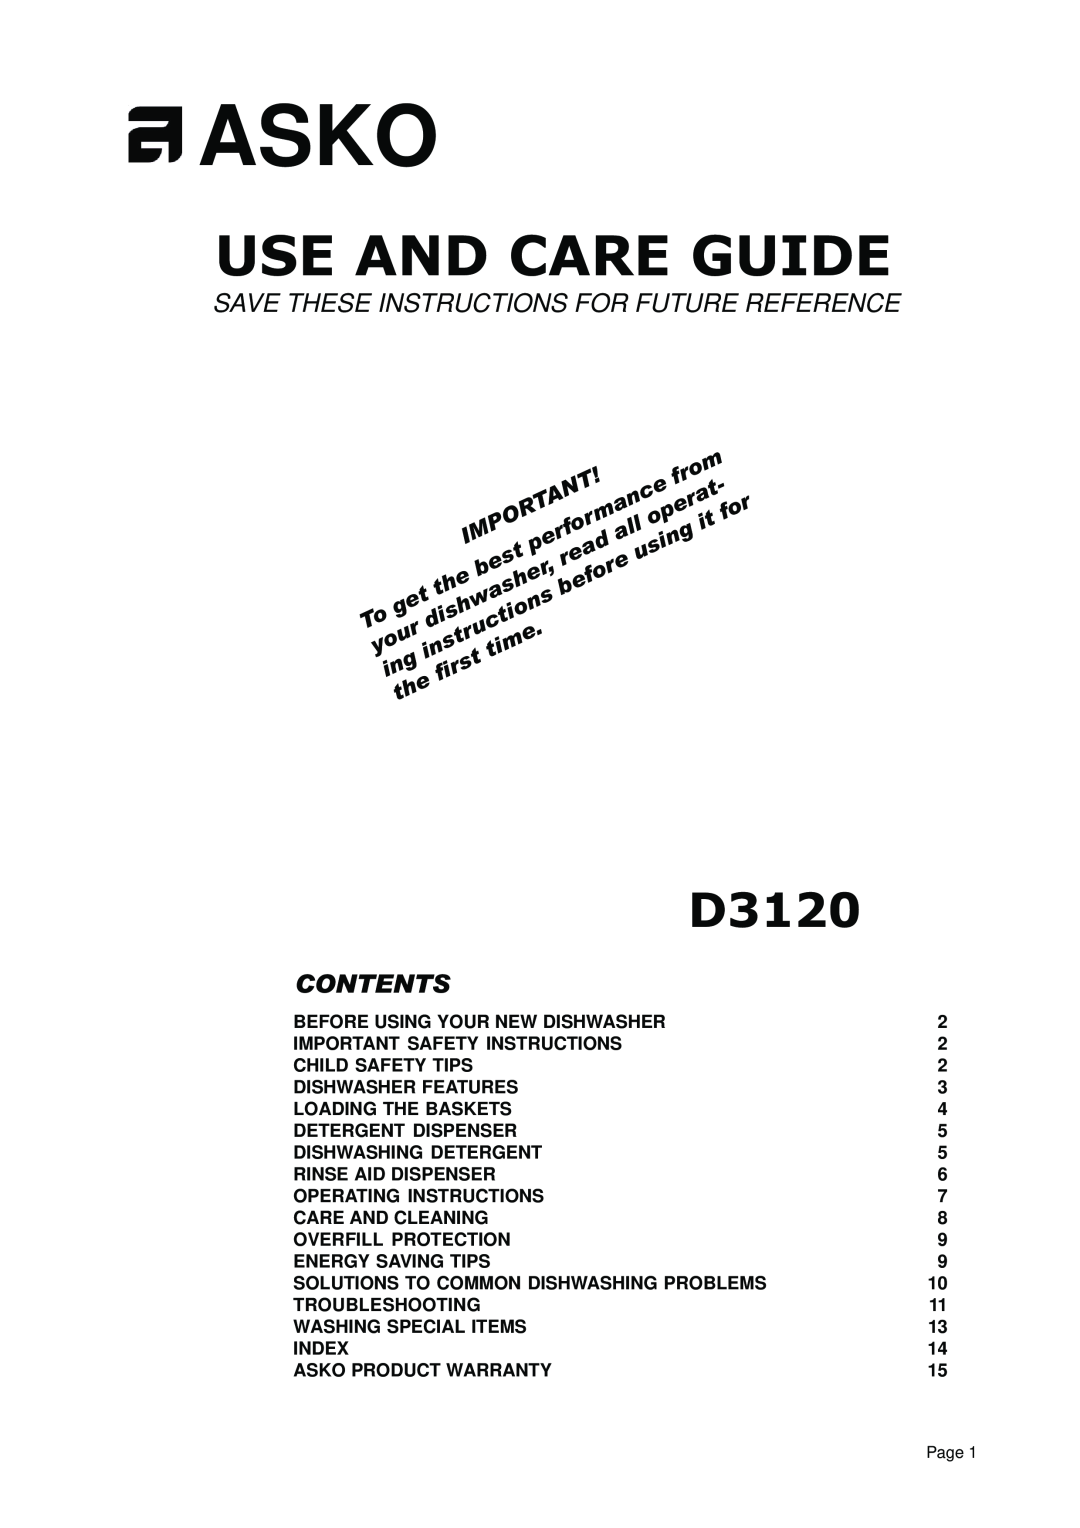 Asko D3250 operating instructions Asko, Use And Care Guide, D3120, Save These Instructions For Future Reference, Contents 